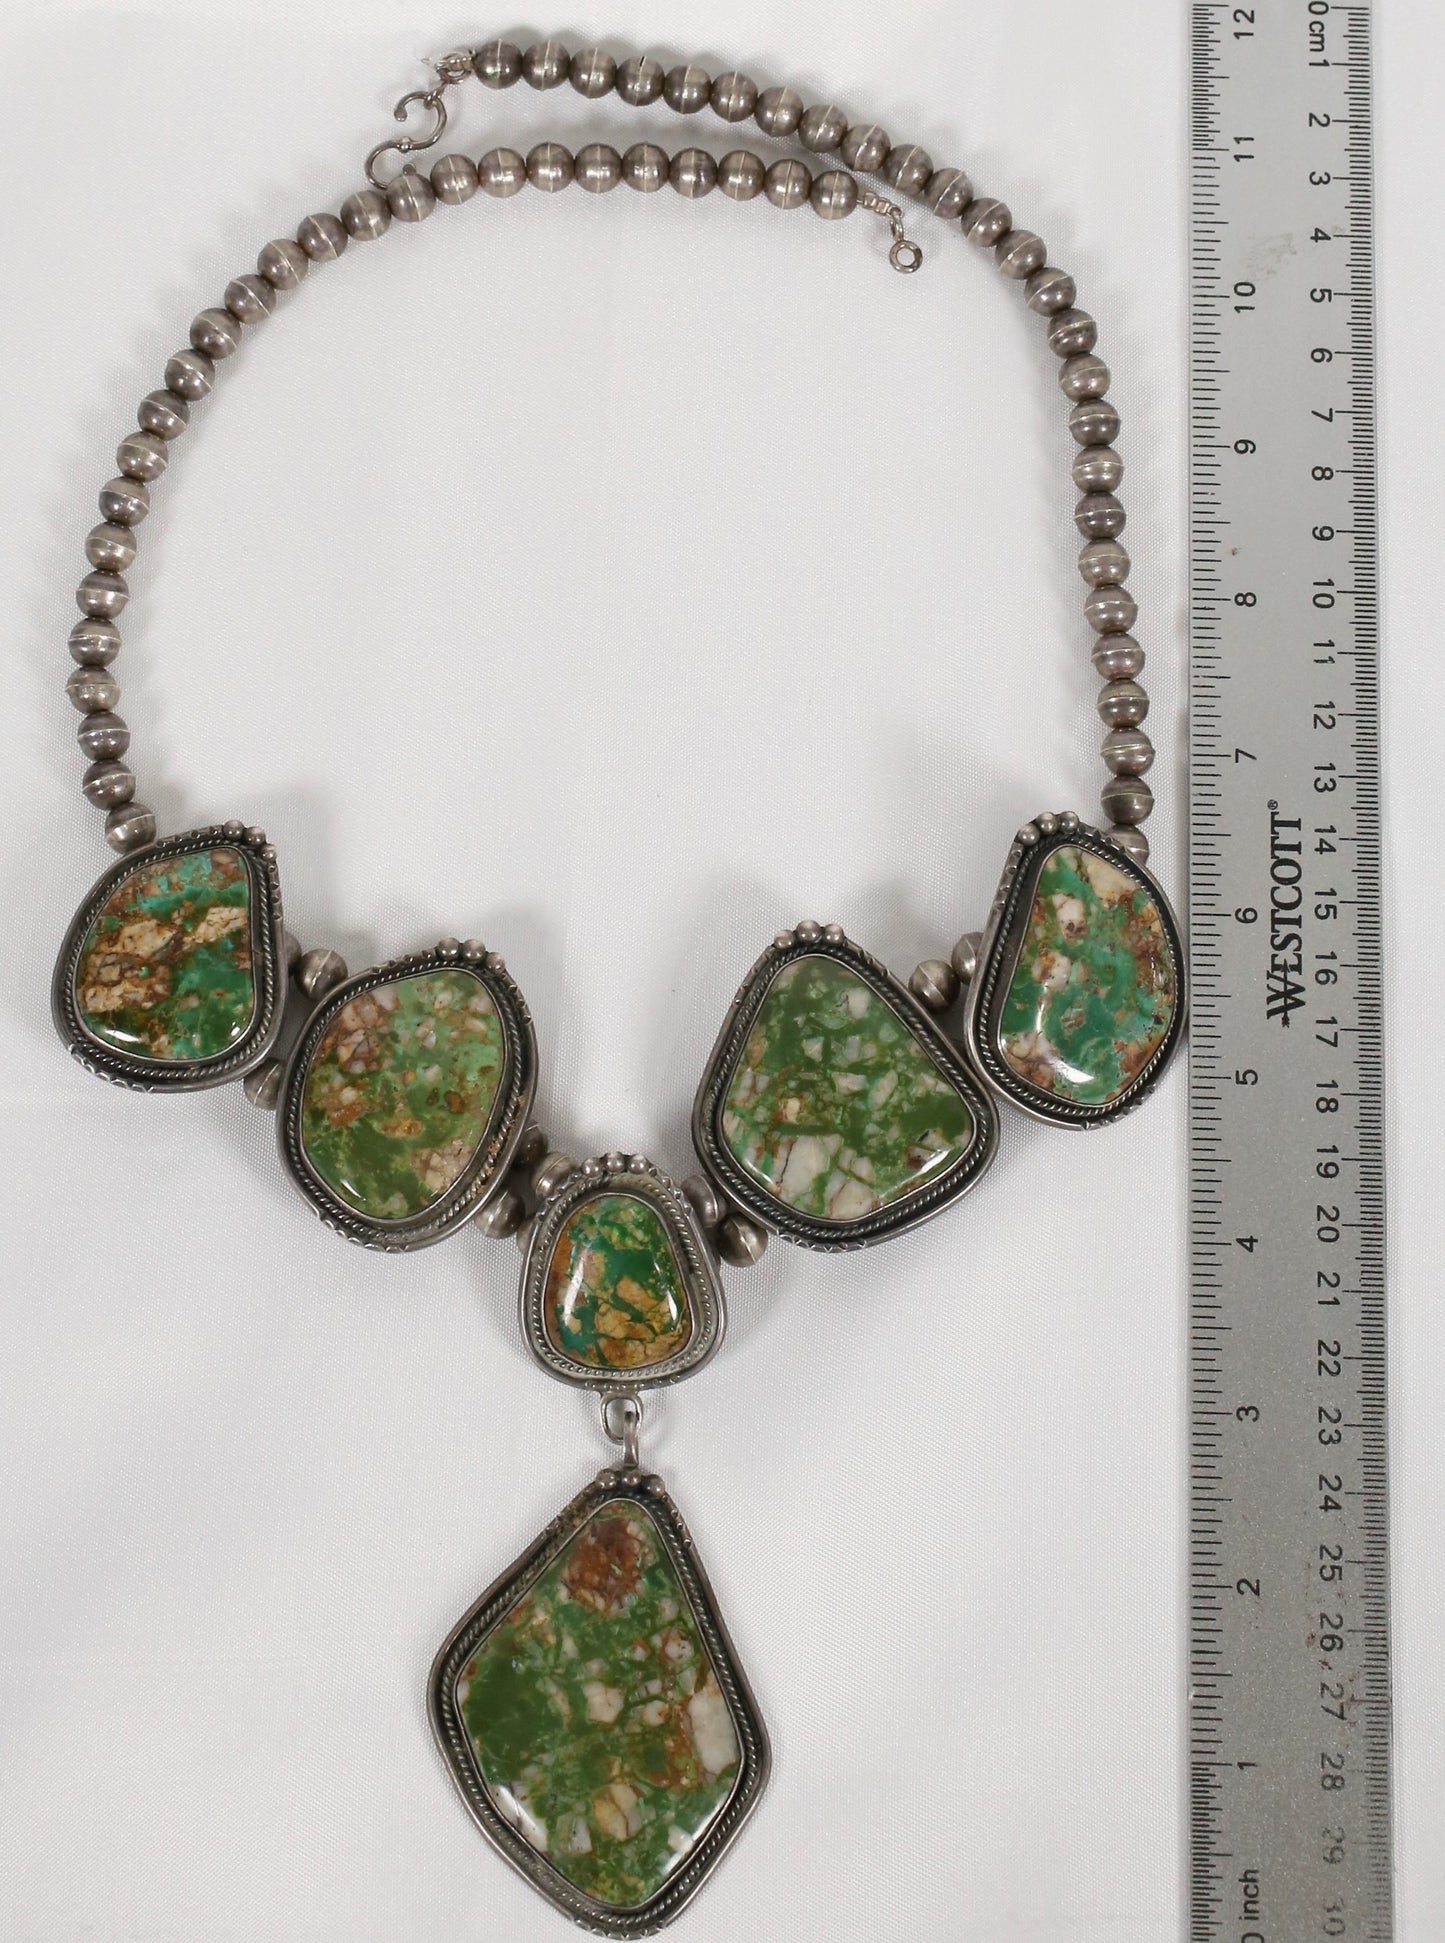 Vintage Sterling Silver Large Green Turquoise Necklace, 26 inches - 219.8g